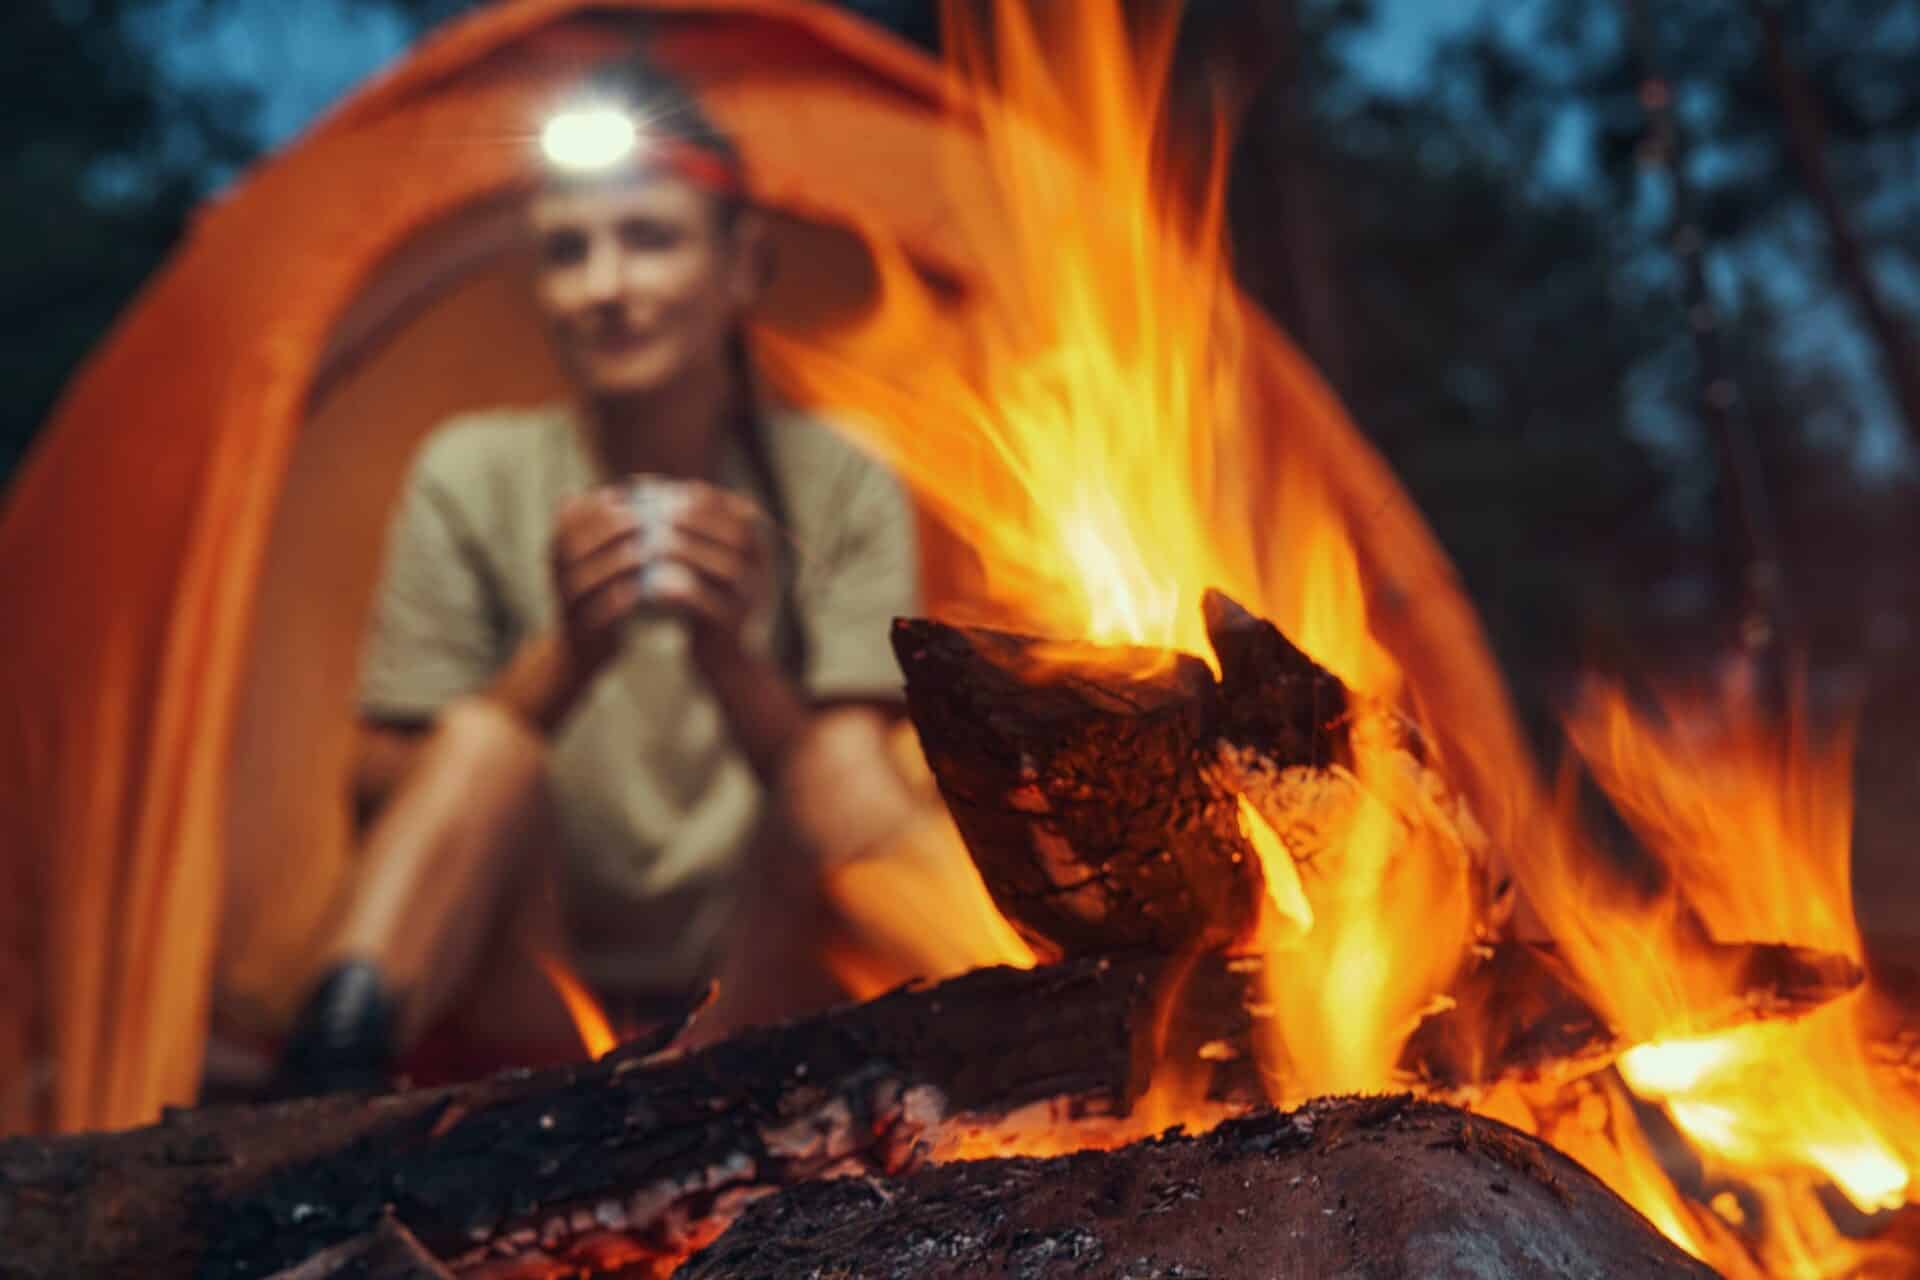 Campfire burning before a woman in tent